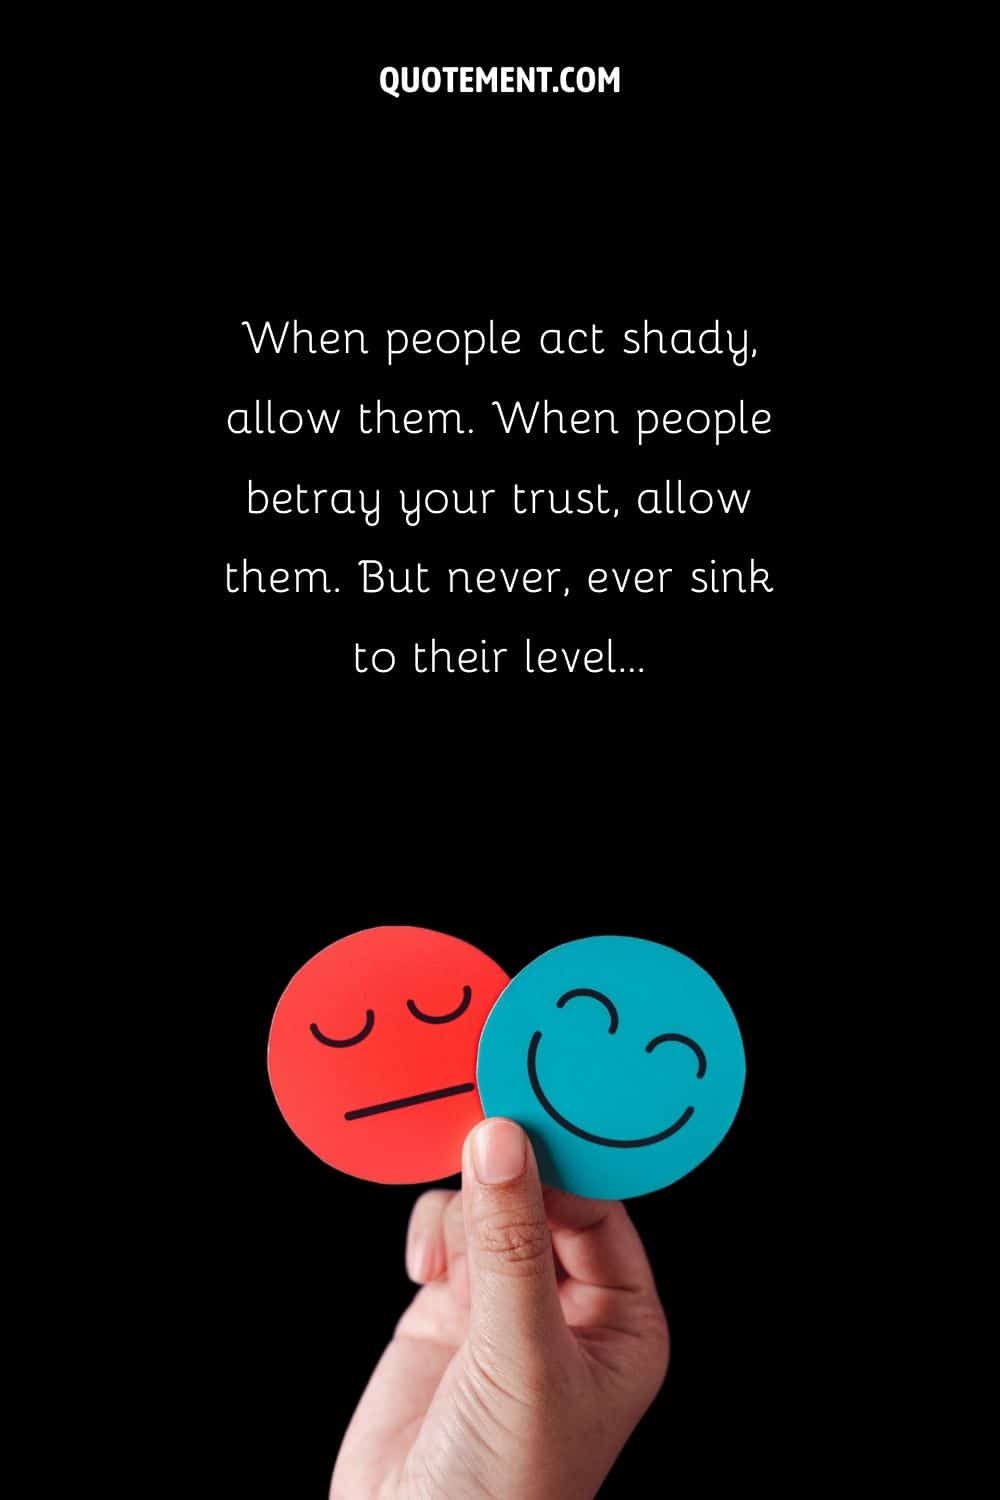 happy and sad emojis in a hand image representing inspirational quote about fake people using you